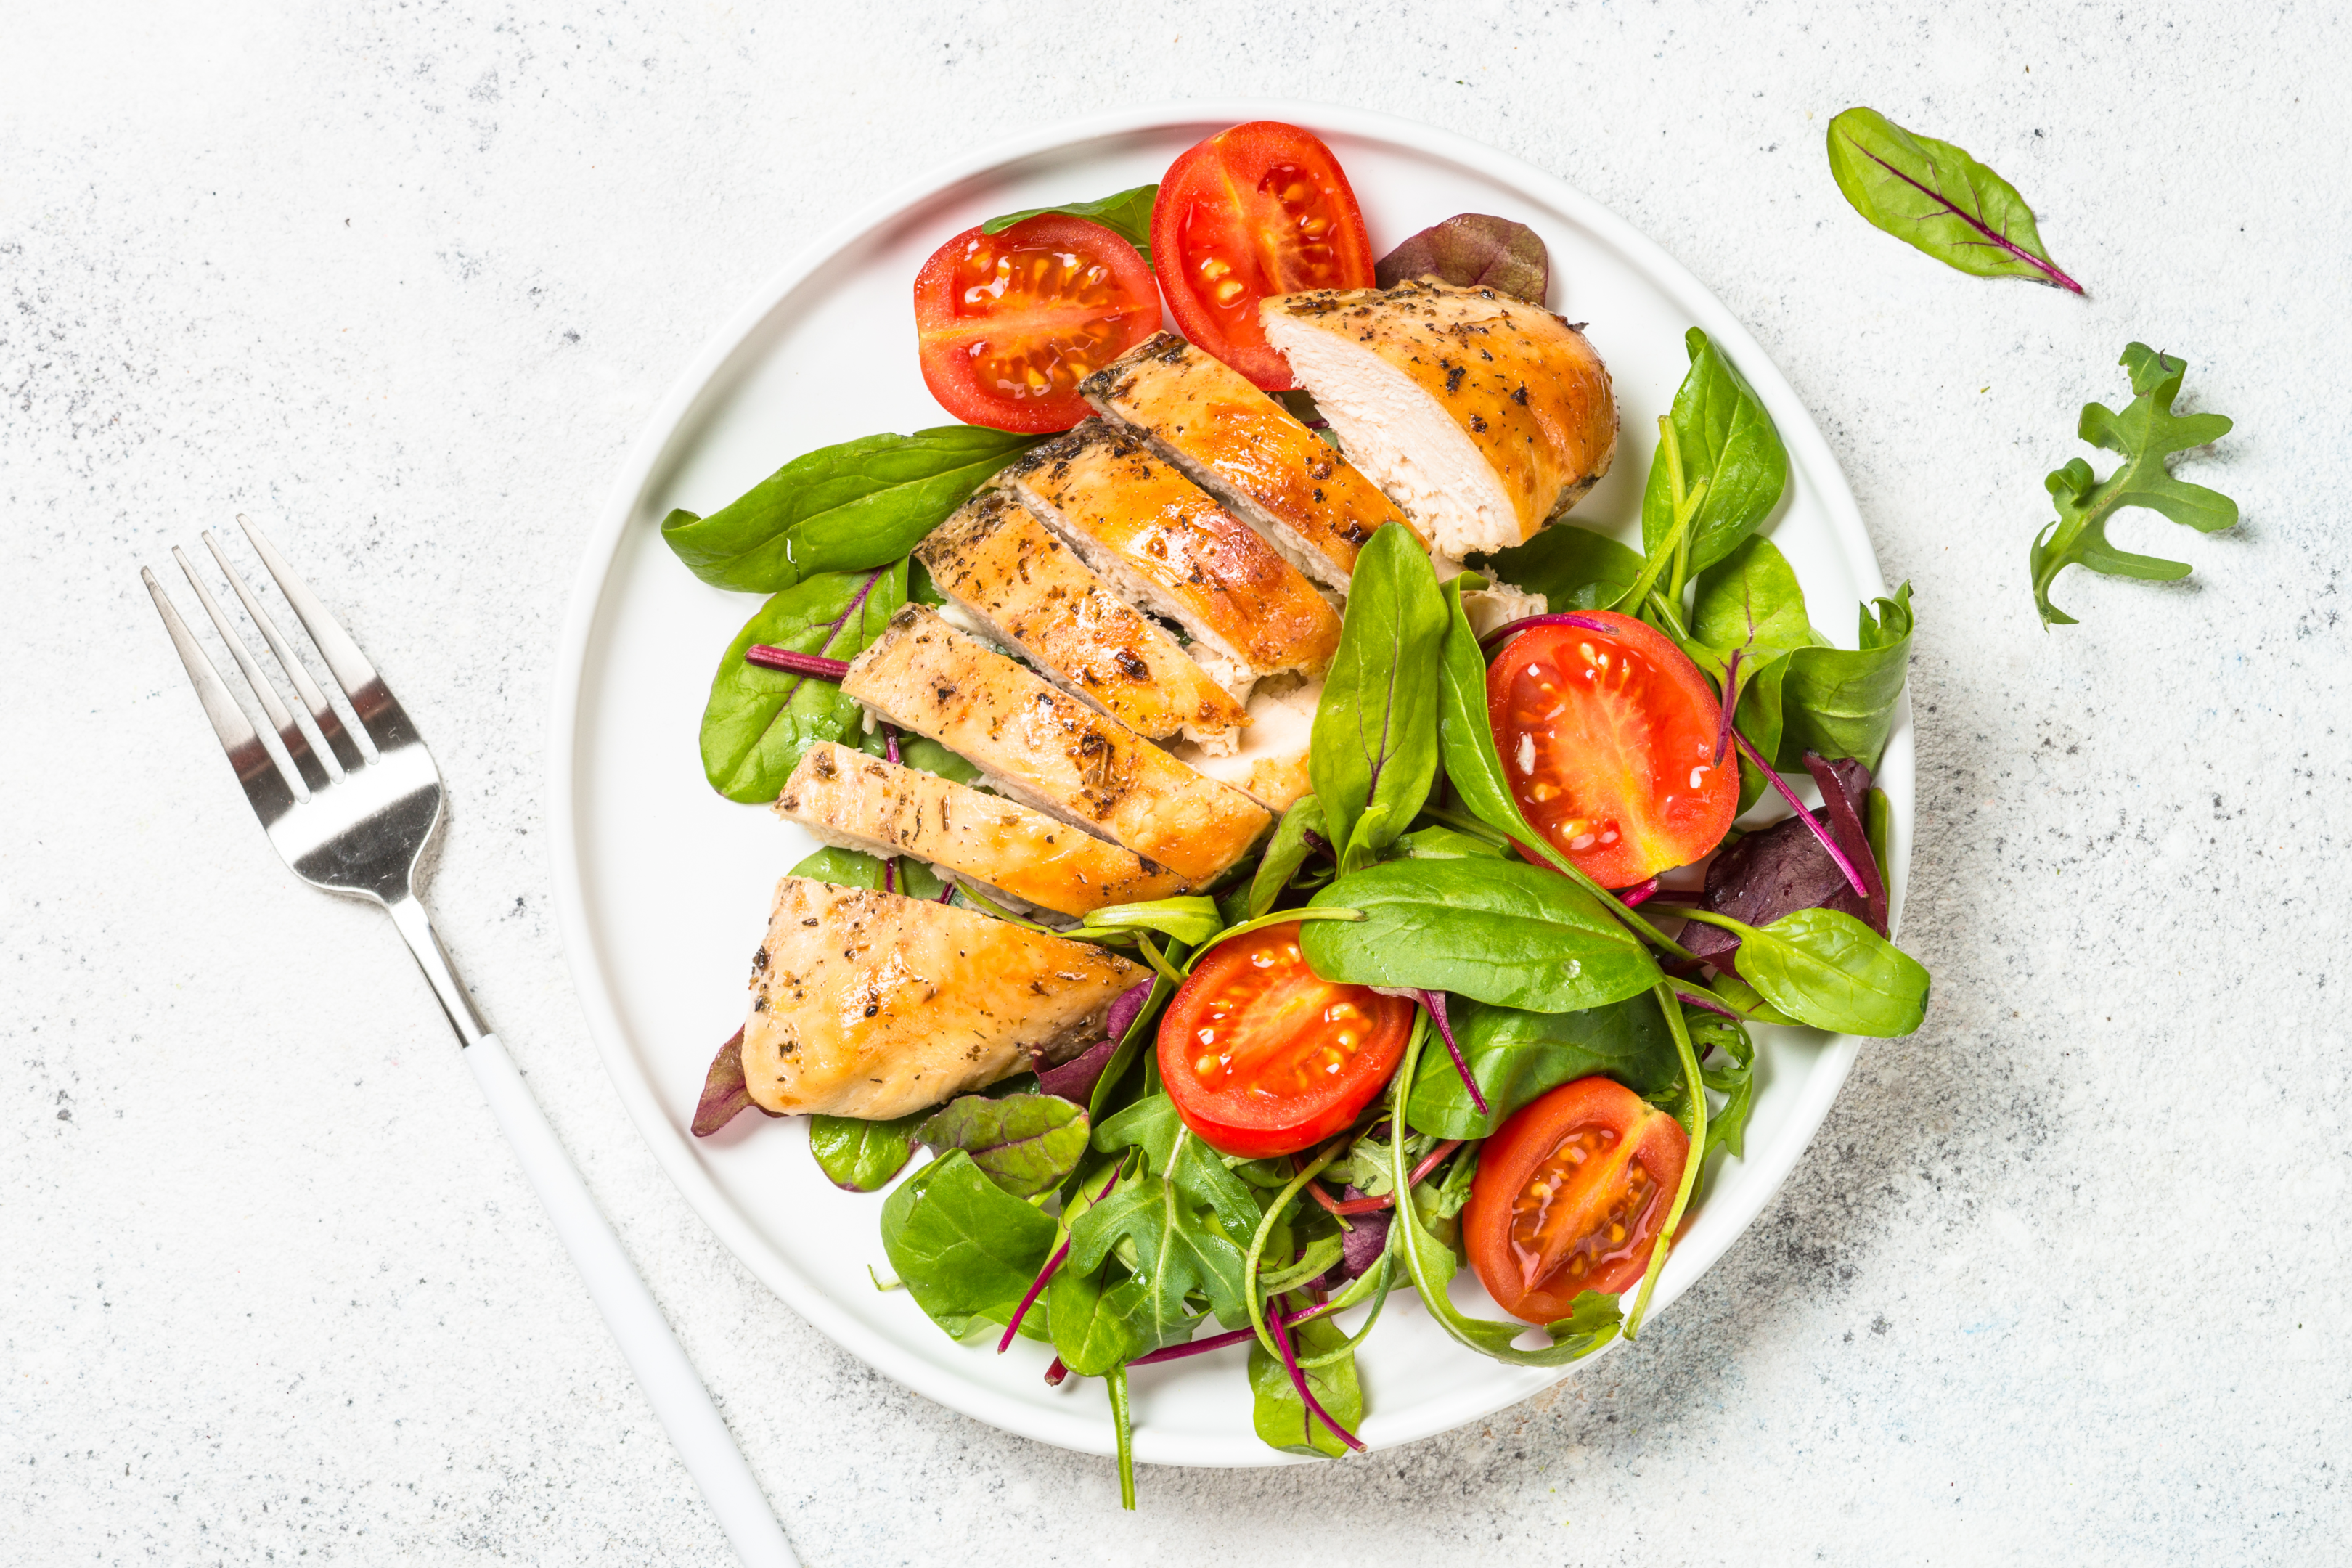 Grilled chicken breast with salad - lose weight by eating lean meats like chicken breast. 